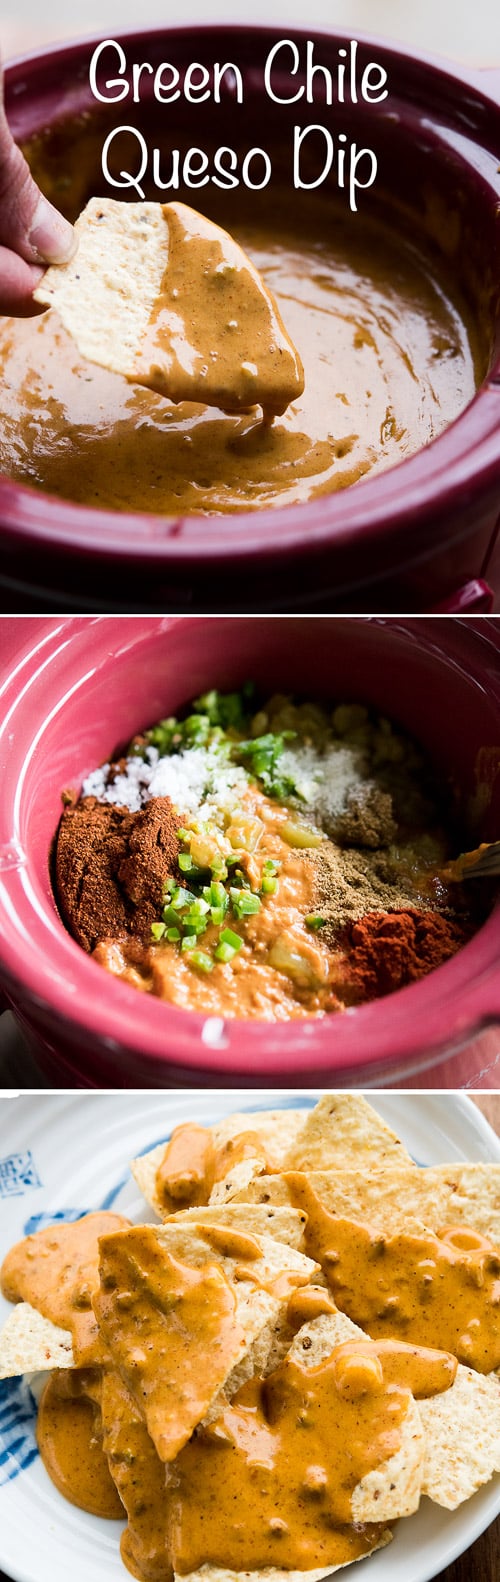 Slow Cooker Green Chile Queso Dip Recipe is Amazing! | @bestrecipebox